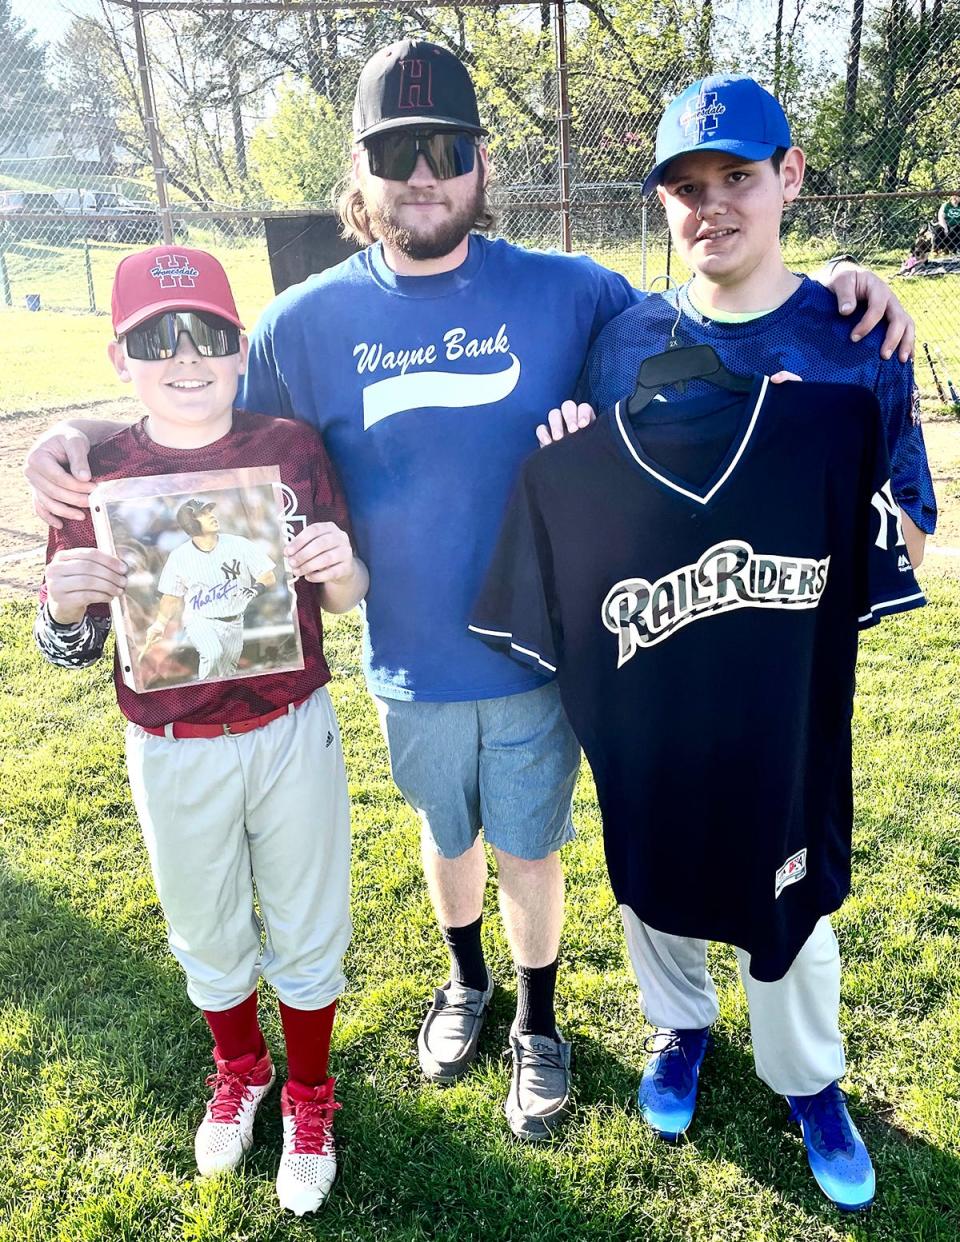 The Honesdale Little Baseball Association hosted Opening Day ceremonies for the 2023 season Monday night at Scott Kinzinger Memorial Complex. Pictured here is Wayne Bank Dodgers Manager Matt Abbott flanked by players Kaylem Kresge (left) and Tobiaz Smith (right). They're displaying items that are being raffled off as a fundraiser.